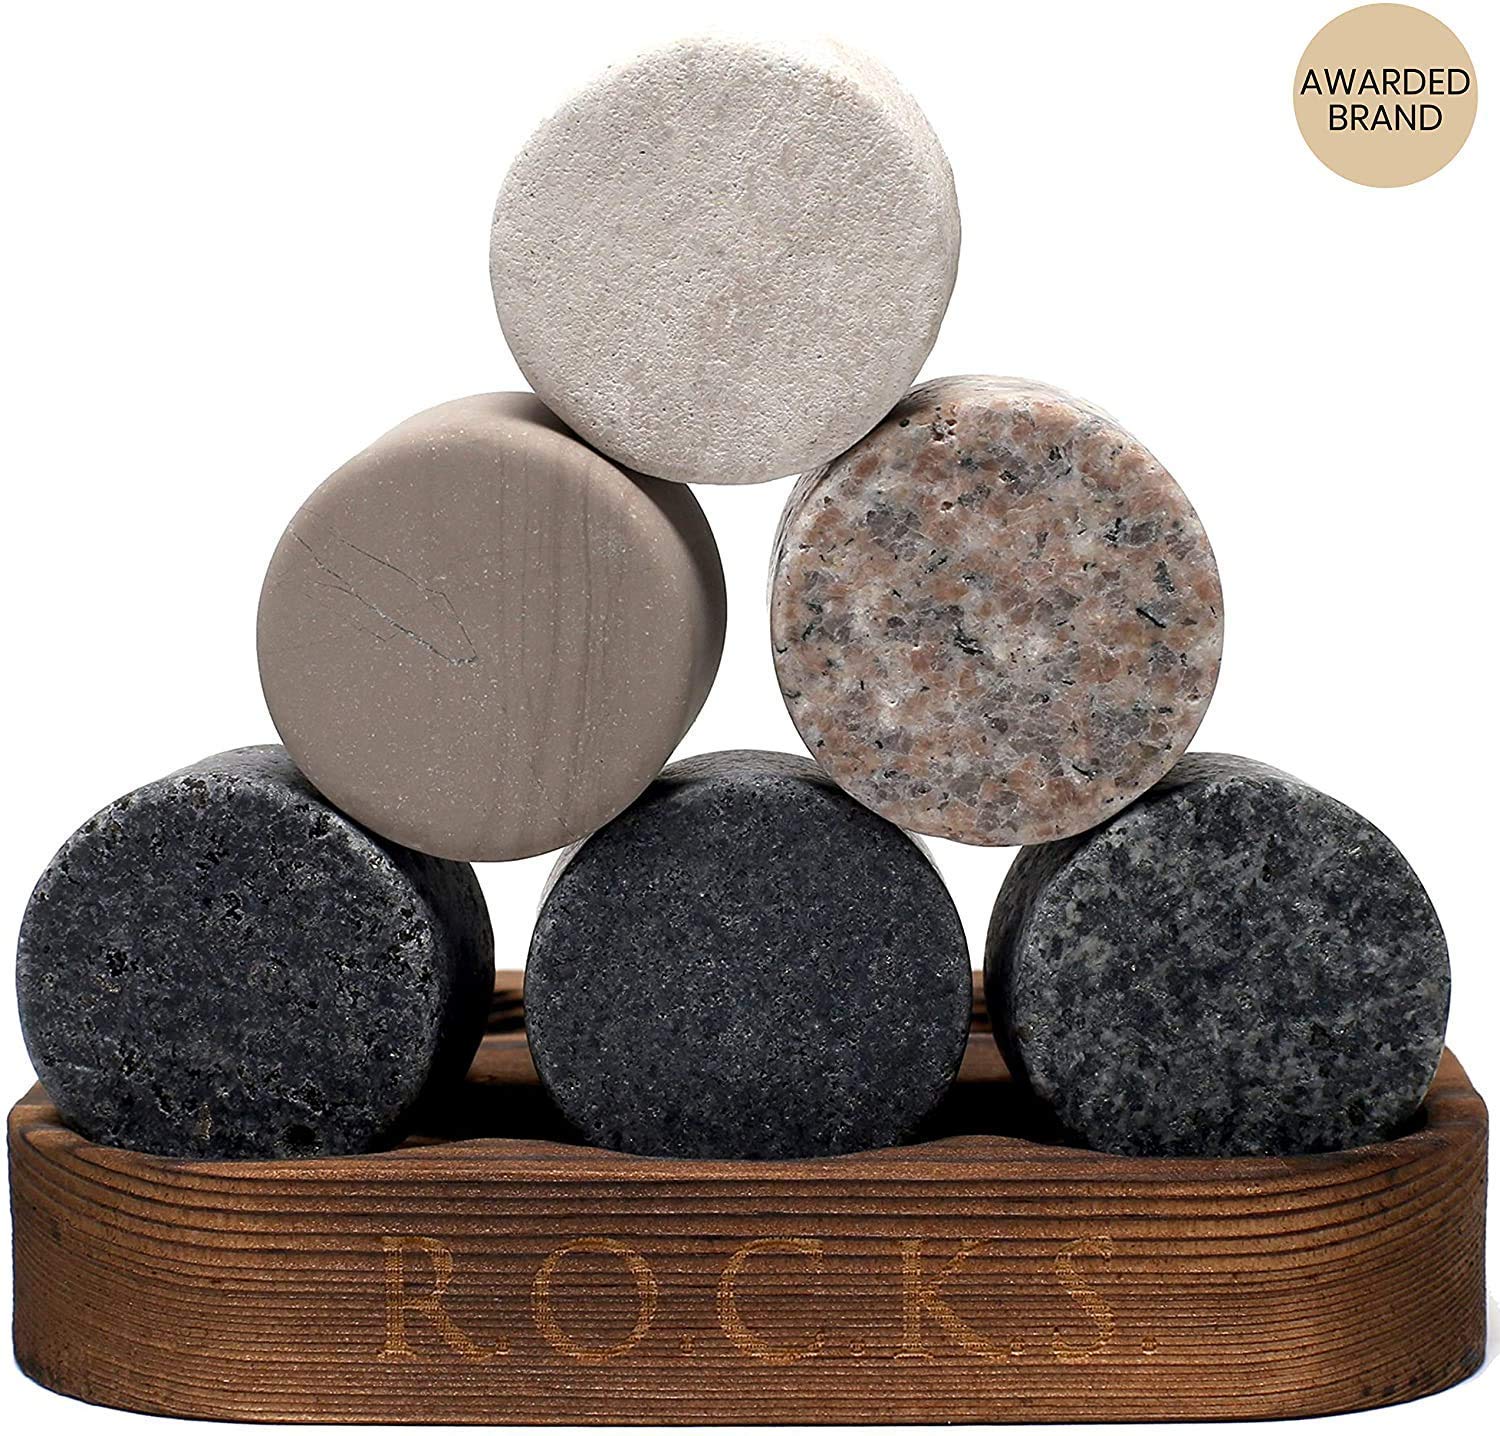 Whiskey Chilling Stones Gift Set - 6 Handcrafted Premium Granite Round Sipping Rocks - 2 Crystal Glass Tumblers - Hardwood Presentation & Storage Tray - Elegant Gold Foil Gift Box by R.O.C.K.S.